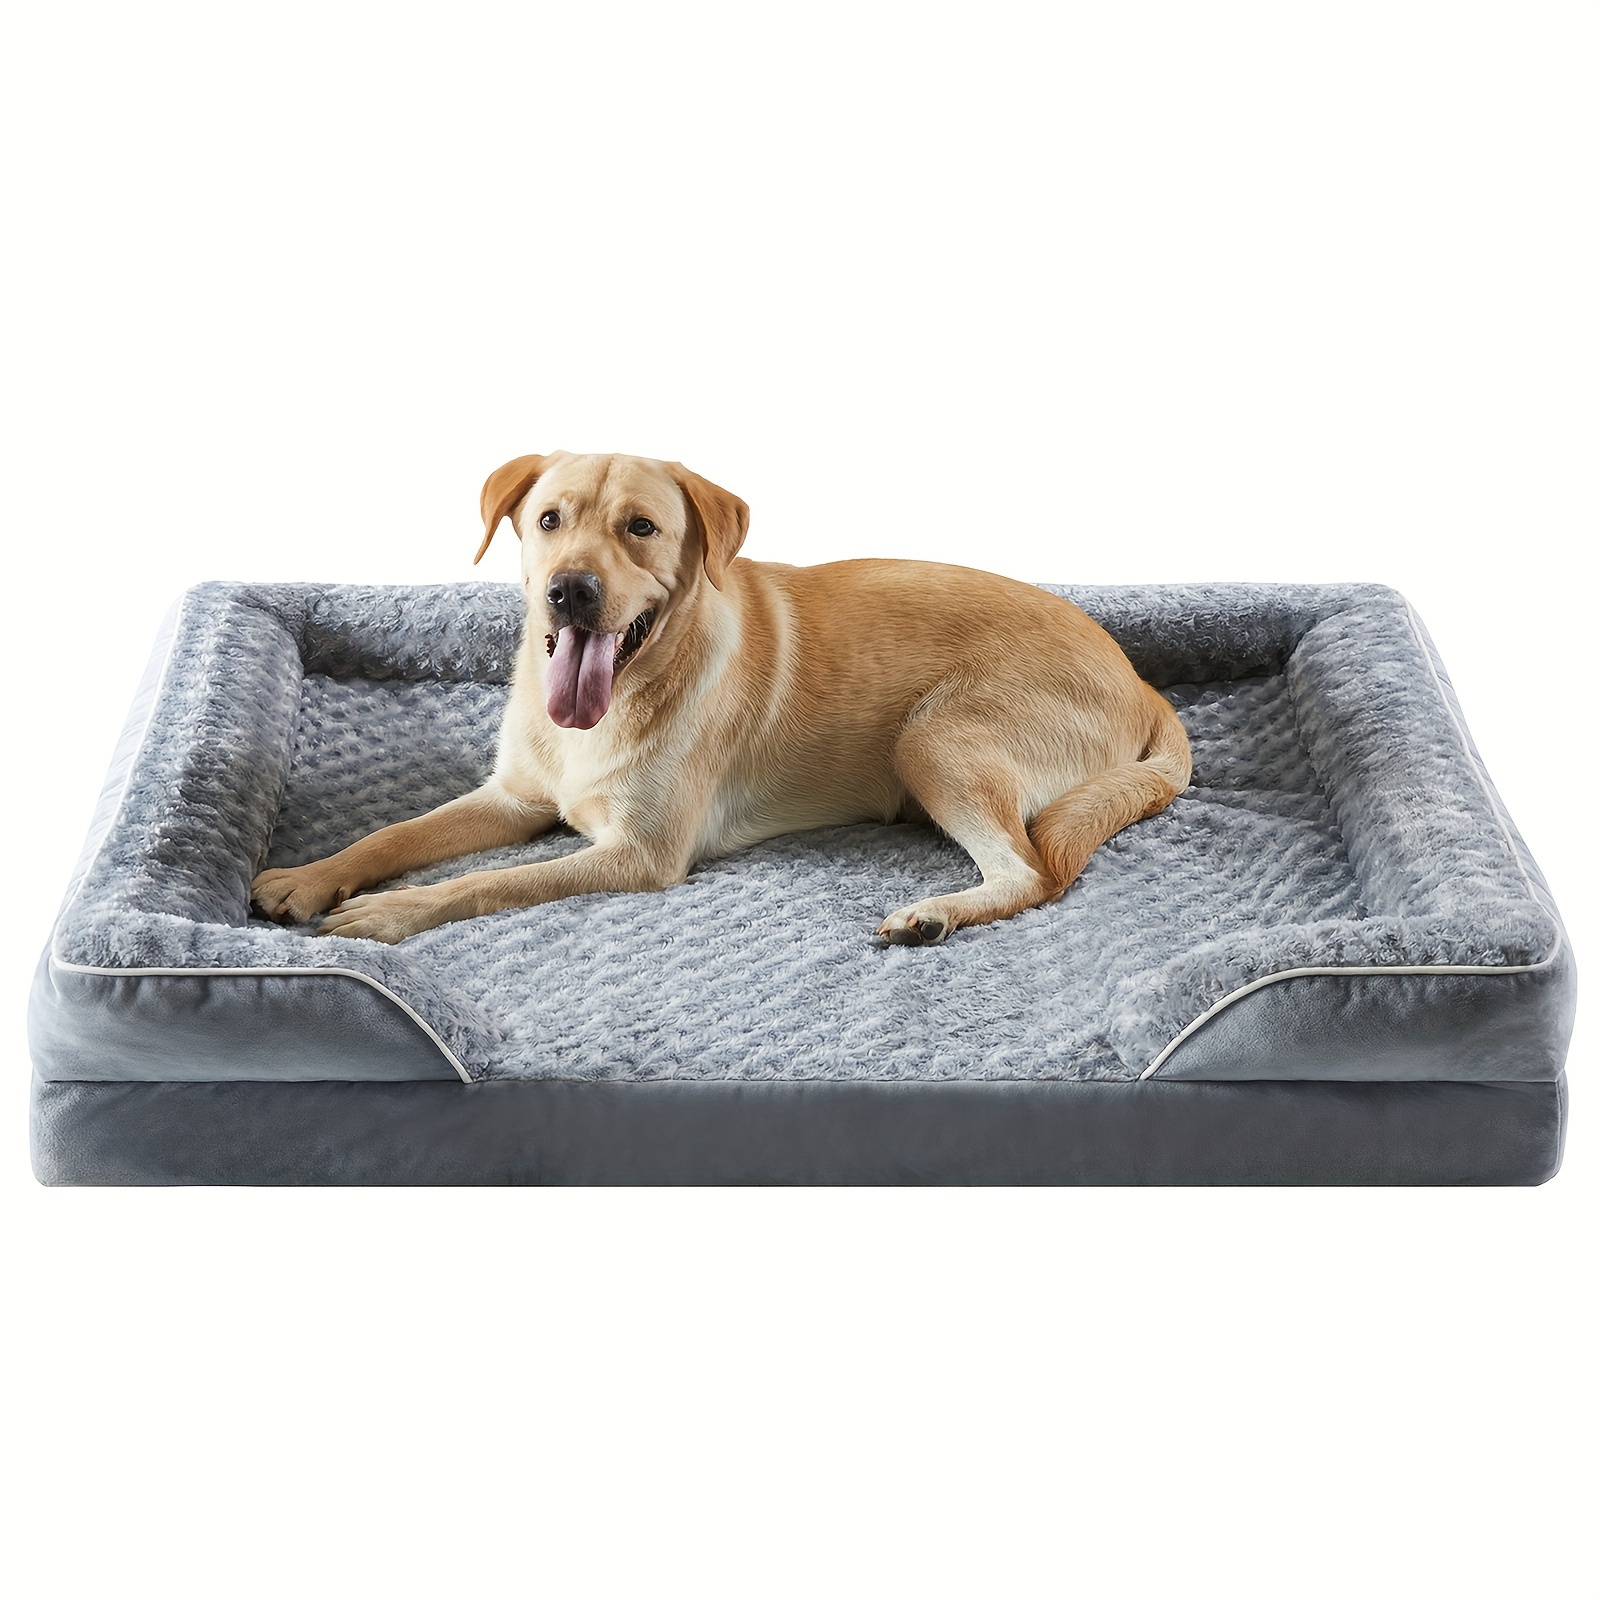 

Dog Beds For Large Dogs, Washable Dog Bed, Bolster Dog Sofa Bed With Waterproof Lining & Non-skid Bottom, Orthopedic Egg Foam Dog Couch For Pet Sleeping, Pet Bed For Large Dogs